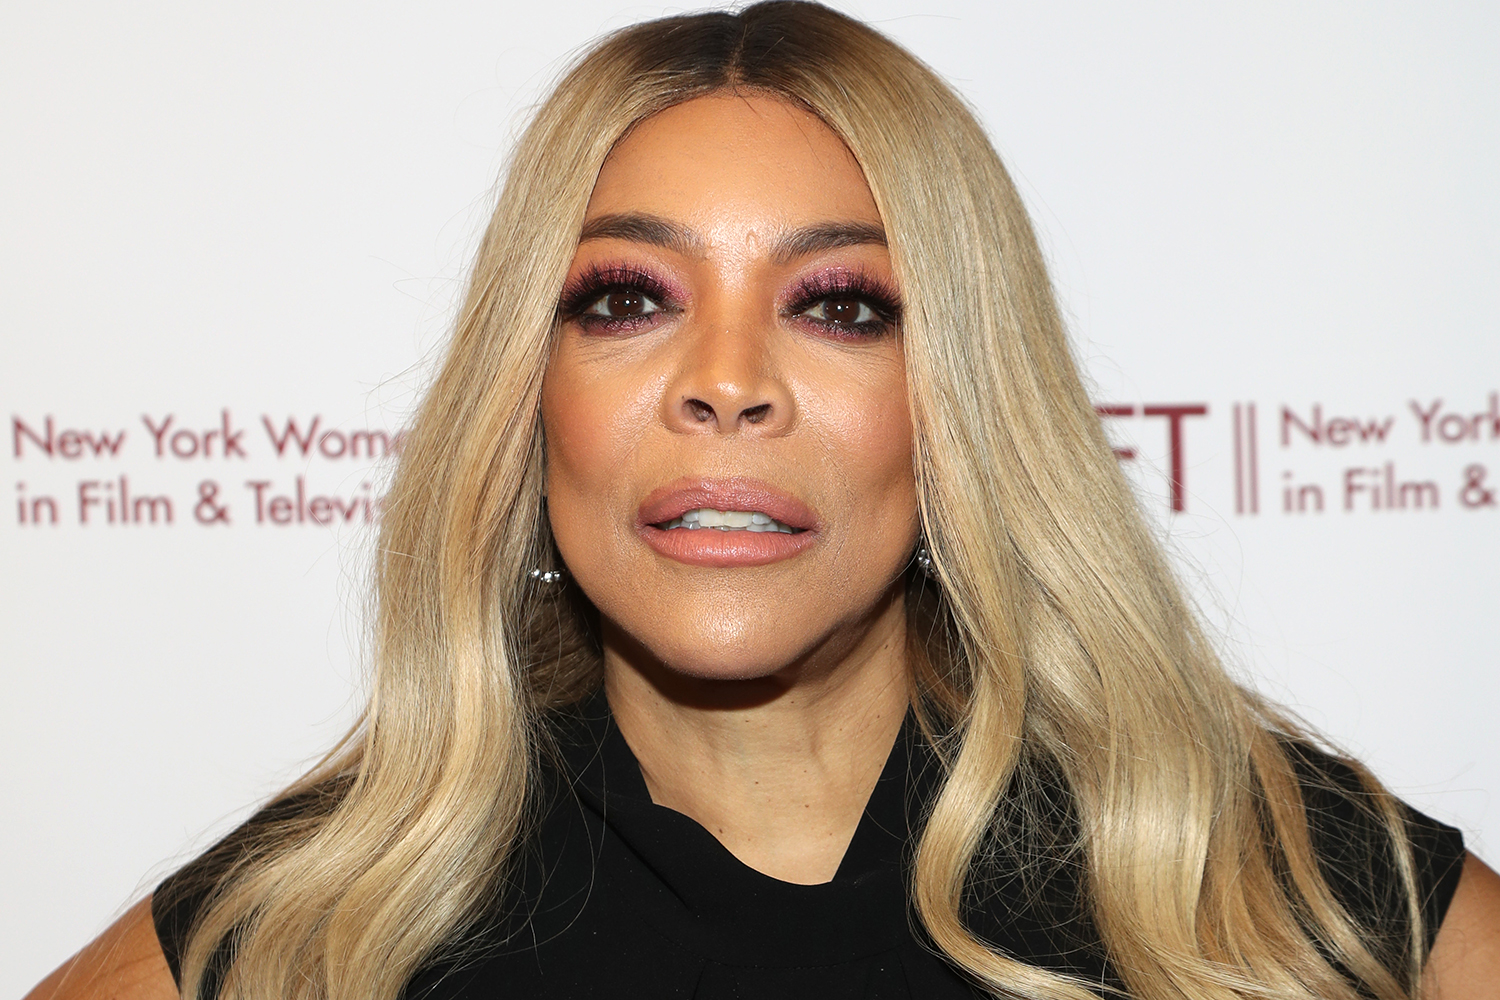 Wendy Williams hits Rock Bottom With Bad Relationship And Mental Health Making Friends Concerned!